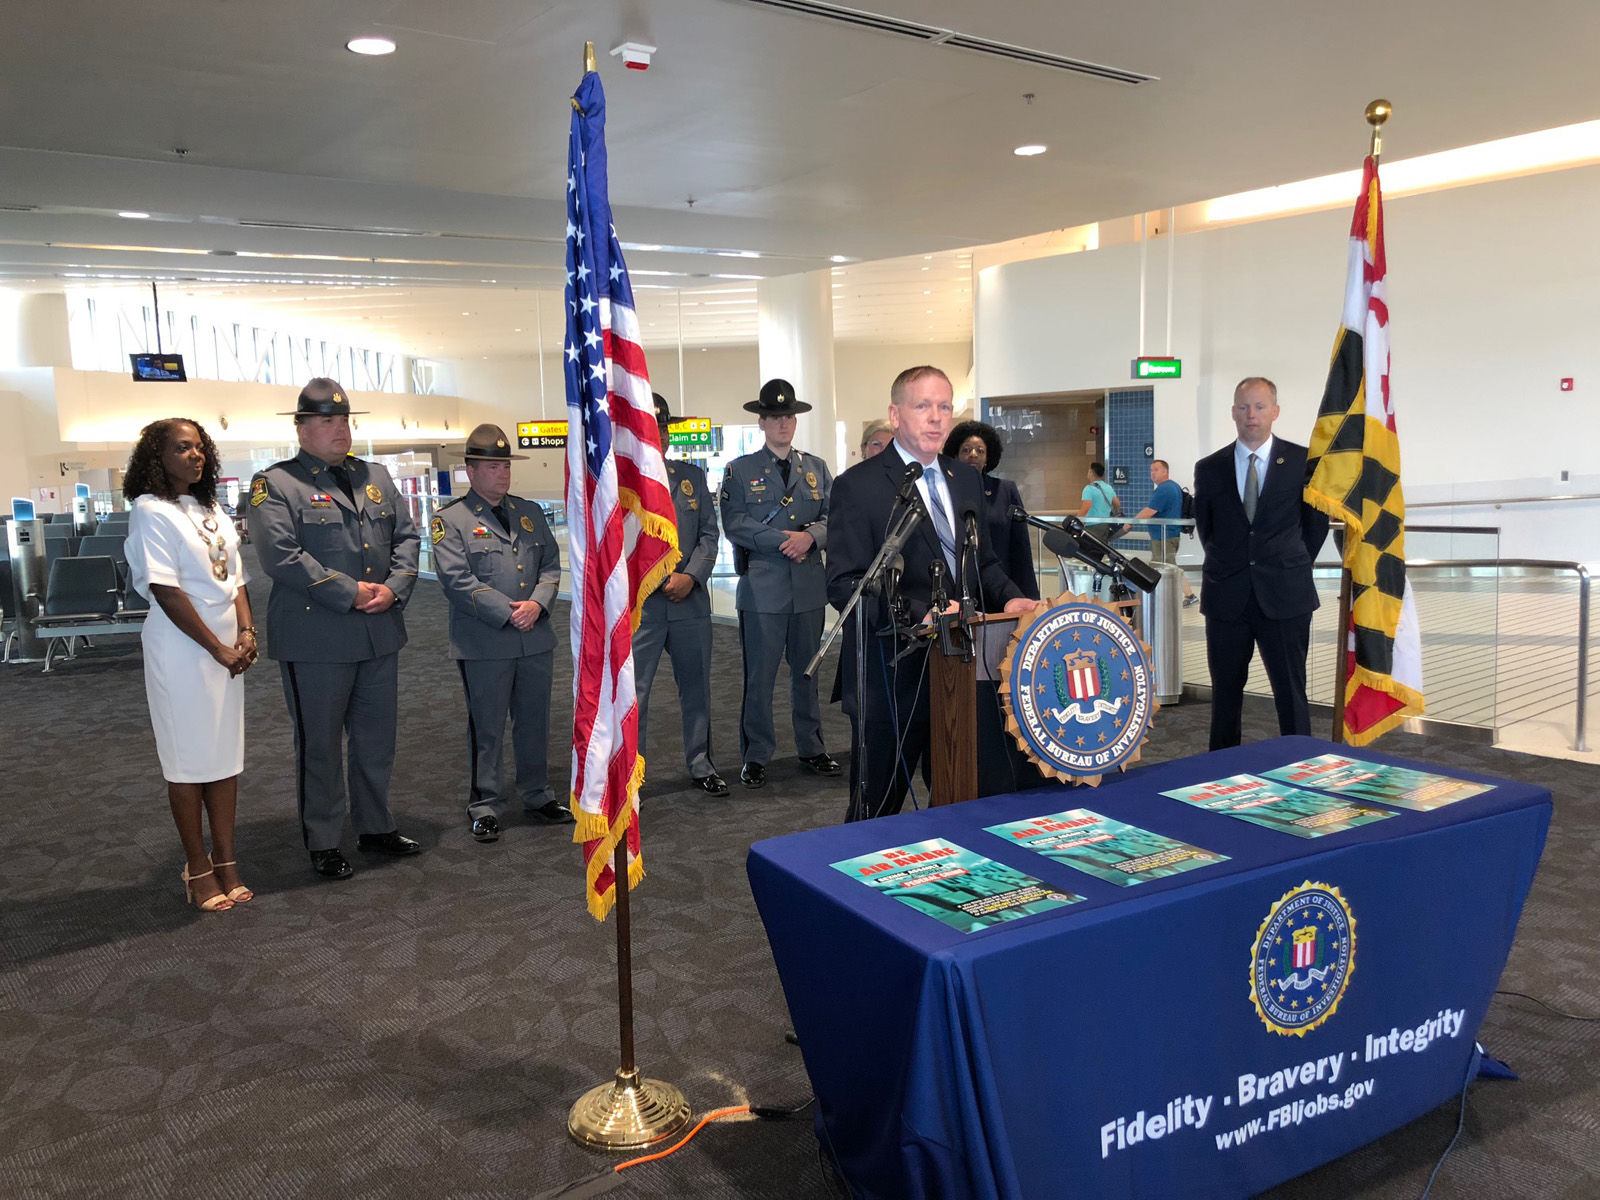 As part of an awareness campaign, the FBI is encouraging anyone who believes they’ve been assaulted to immediately tell a member of the flight crew so law enforcement can meet the aircraft at the gate. (WTOP/John Aaron)